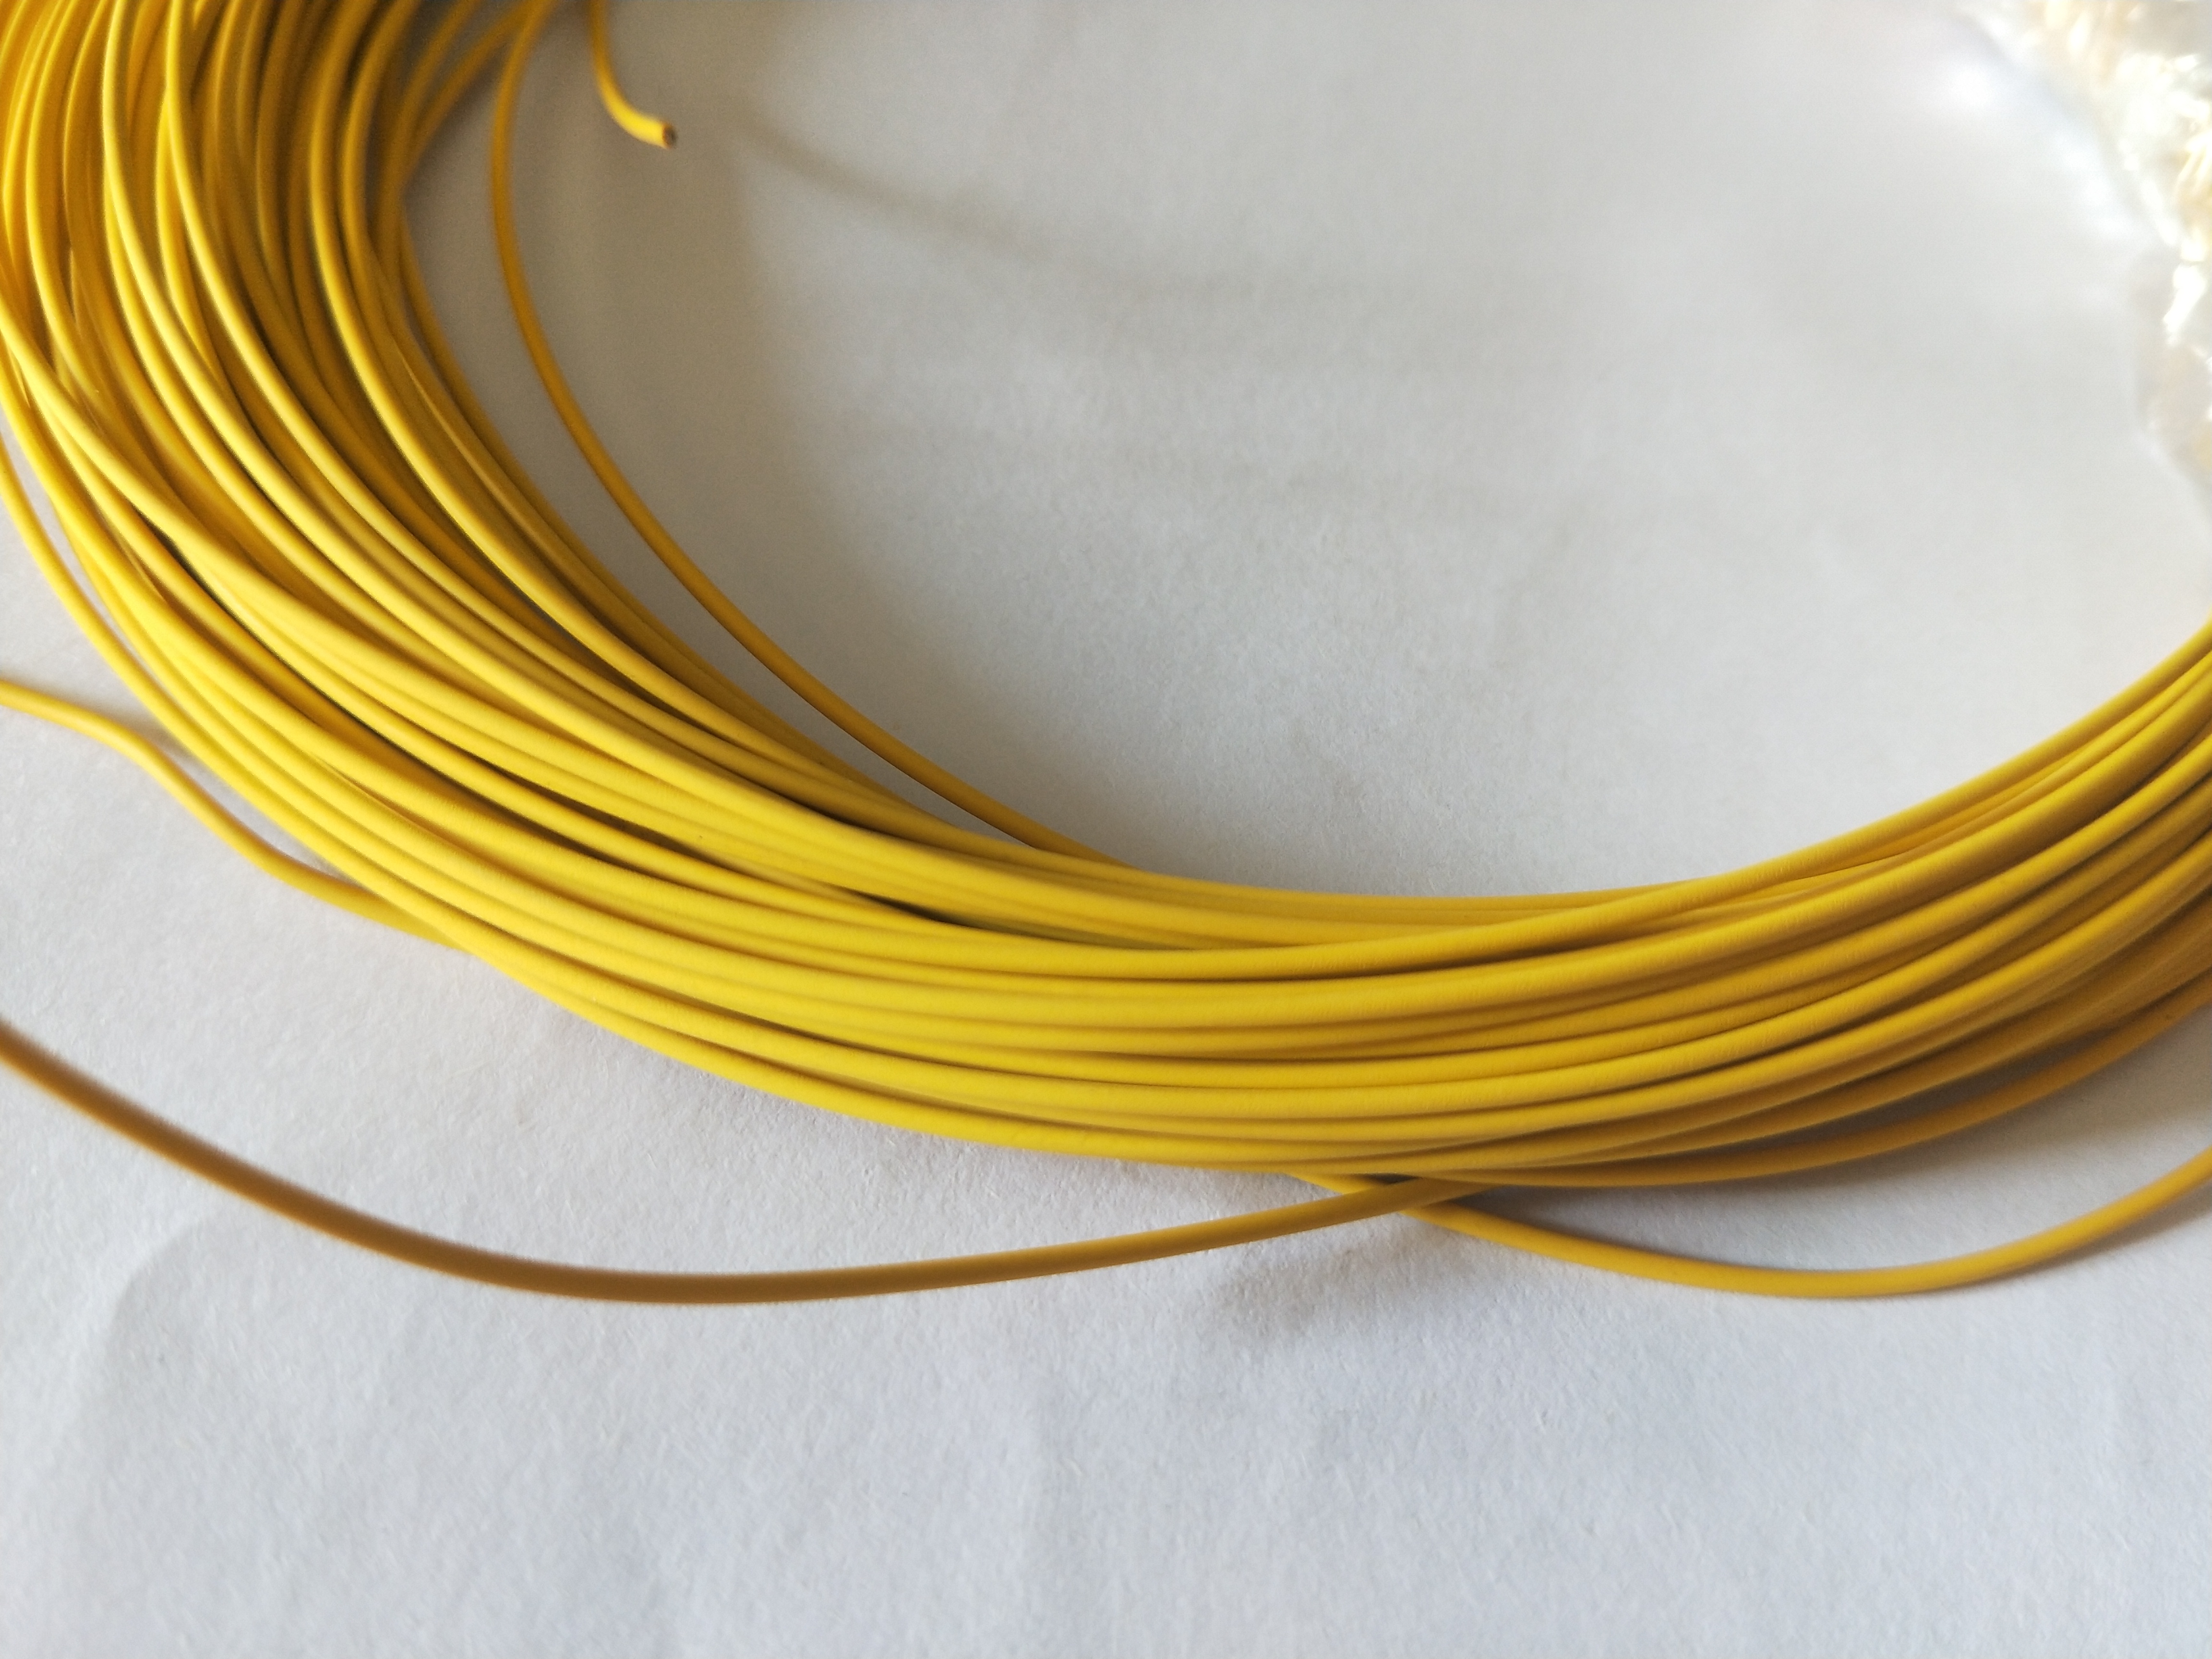 Flexible Oil Resistant Motor Lead wire,Oil Resistant Motor coil winding wire cable,Super Heat Resistant wire cable for Motor